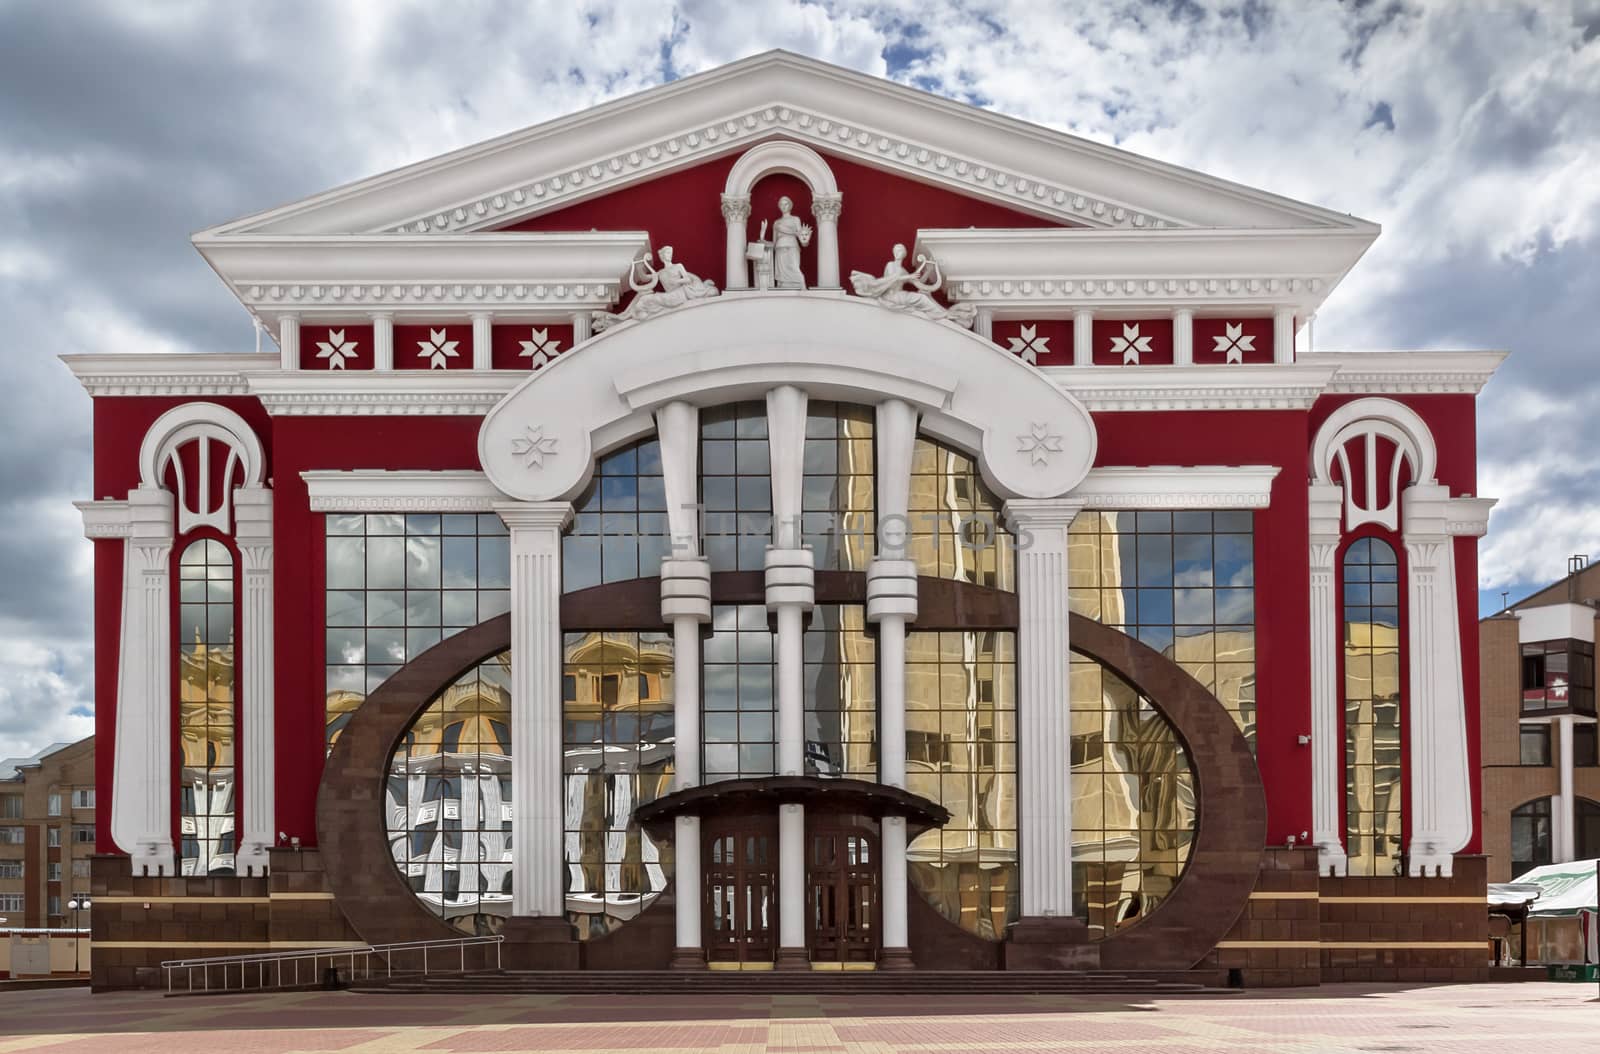 Opera House in Saransk, Russia by Gaina